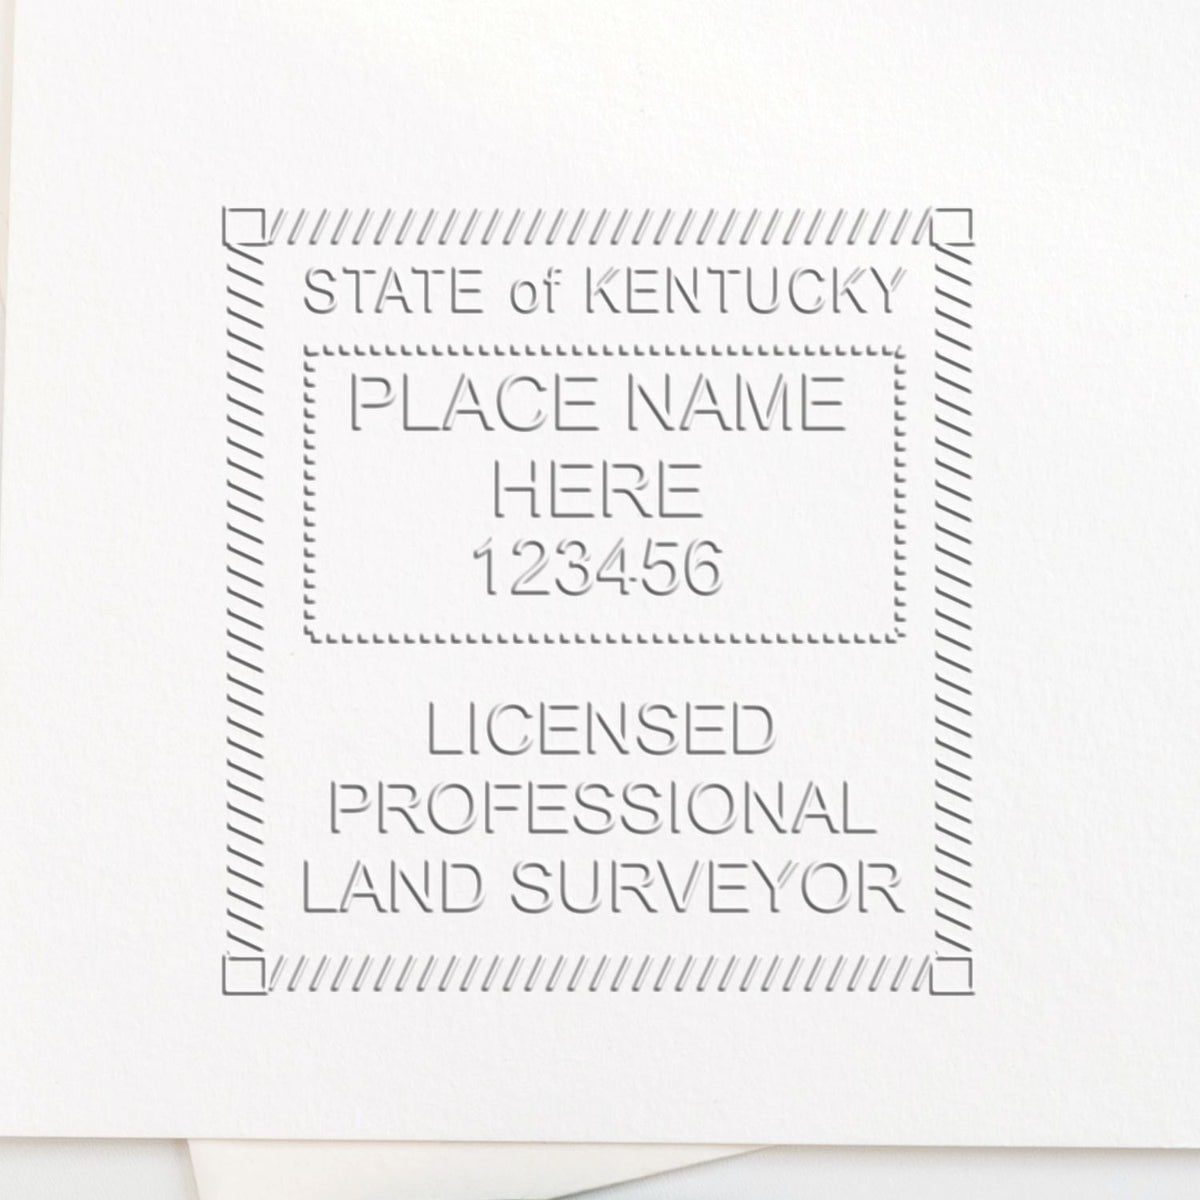 A stamped impression of the Handheld Kentucky Land Surveyor Seal in this stylish lifestyle photo, setting the tone for a unique and personalized product.